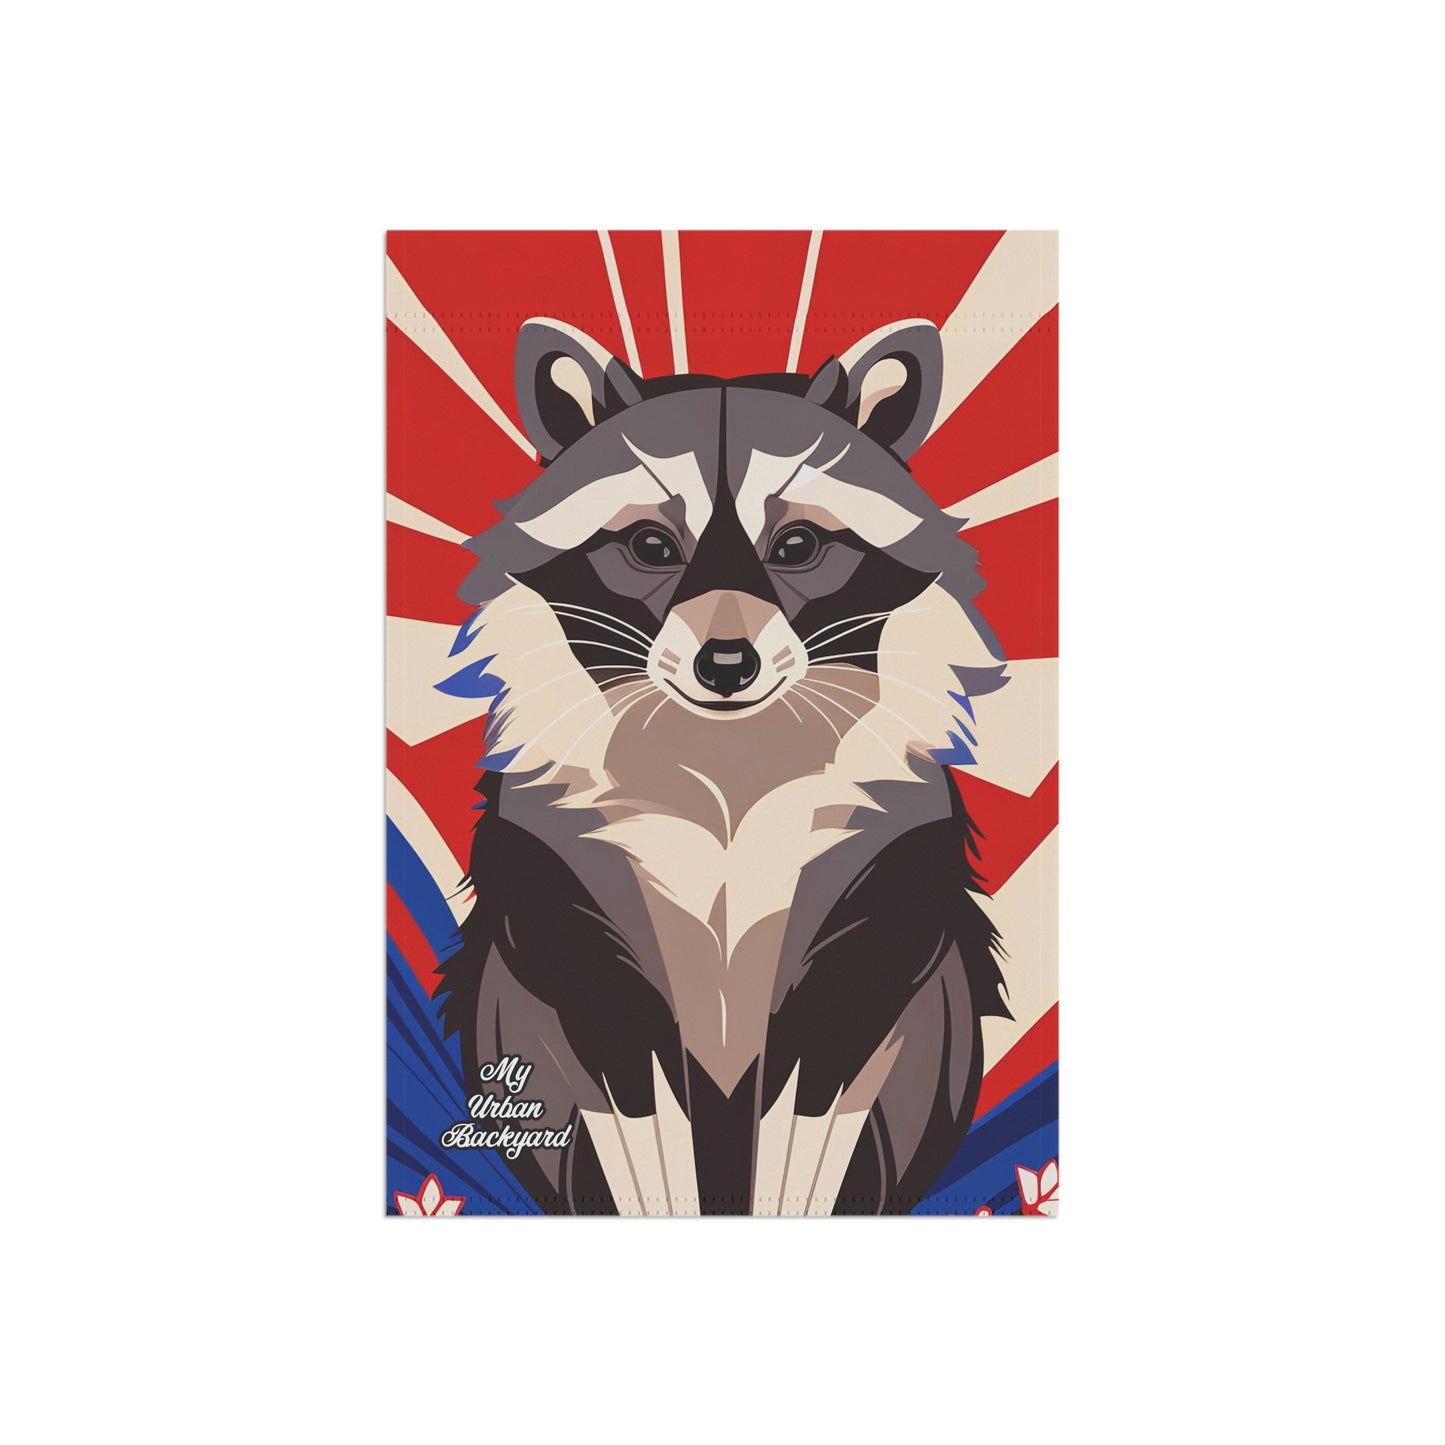 Raccoon on Art Deco Rays, Garden Flag for Yard, Patio, Porch, or Work, 12"x18" - Flag only